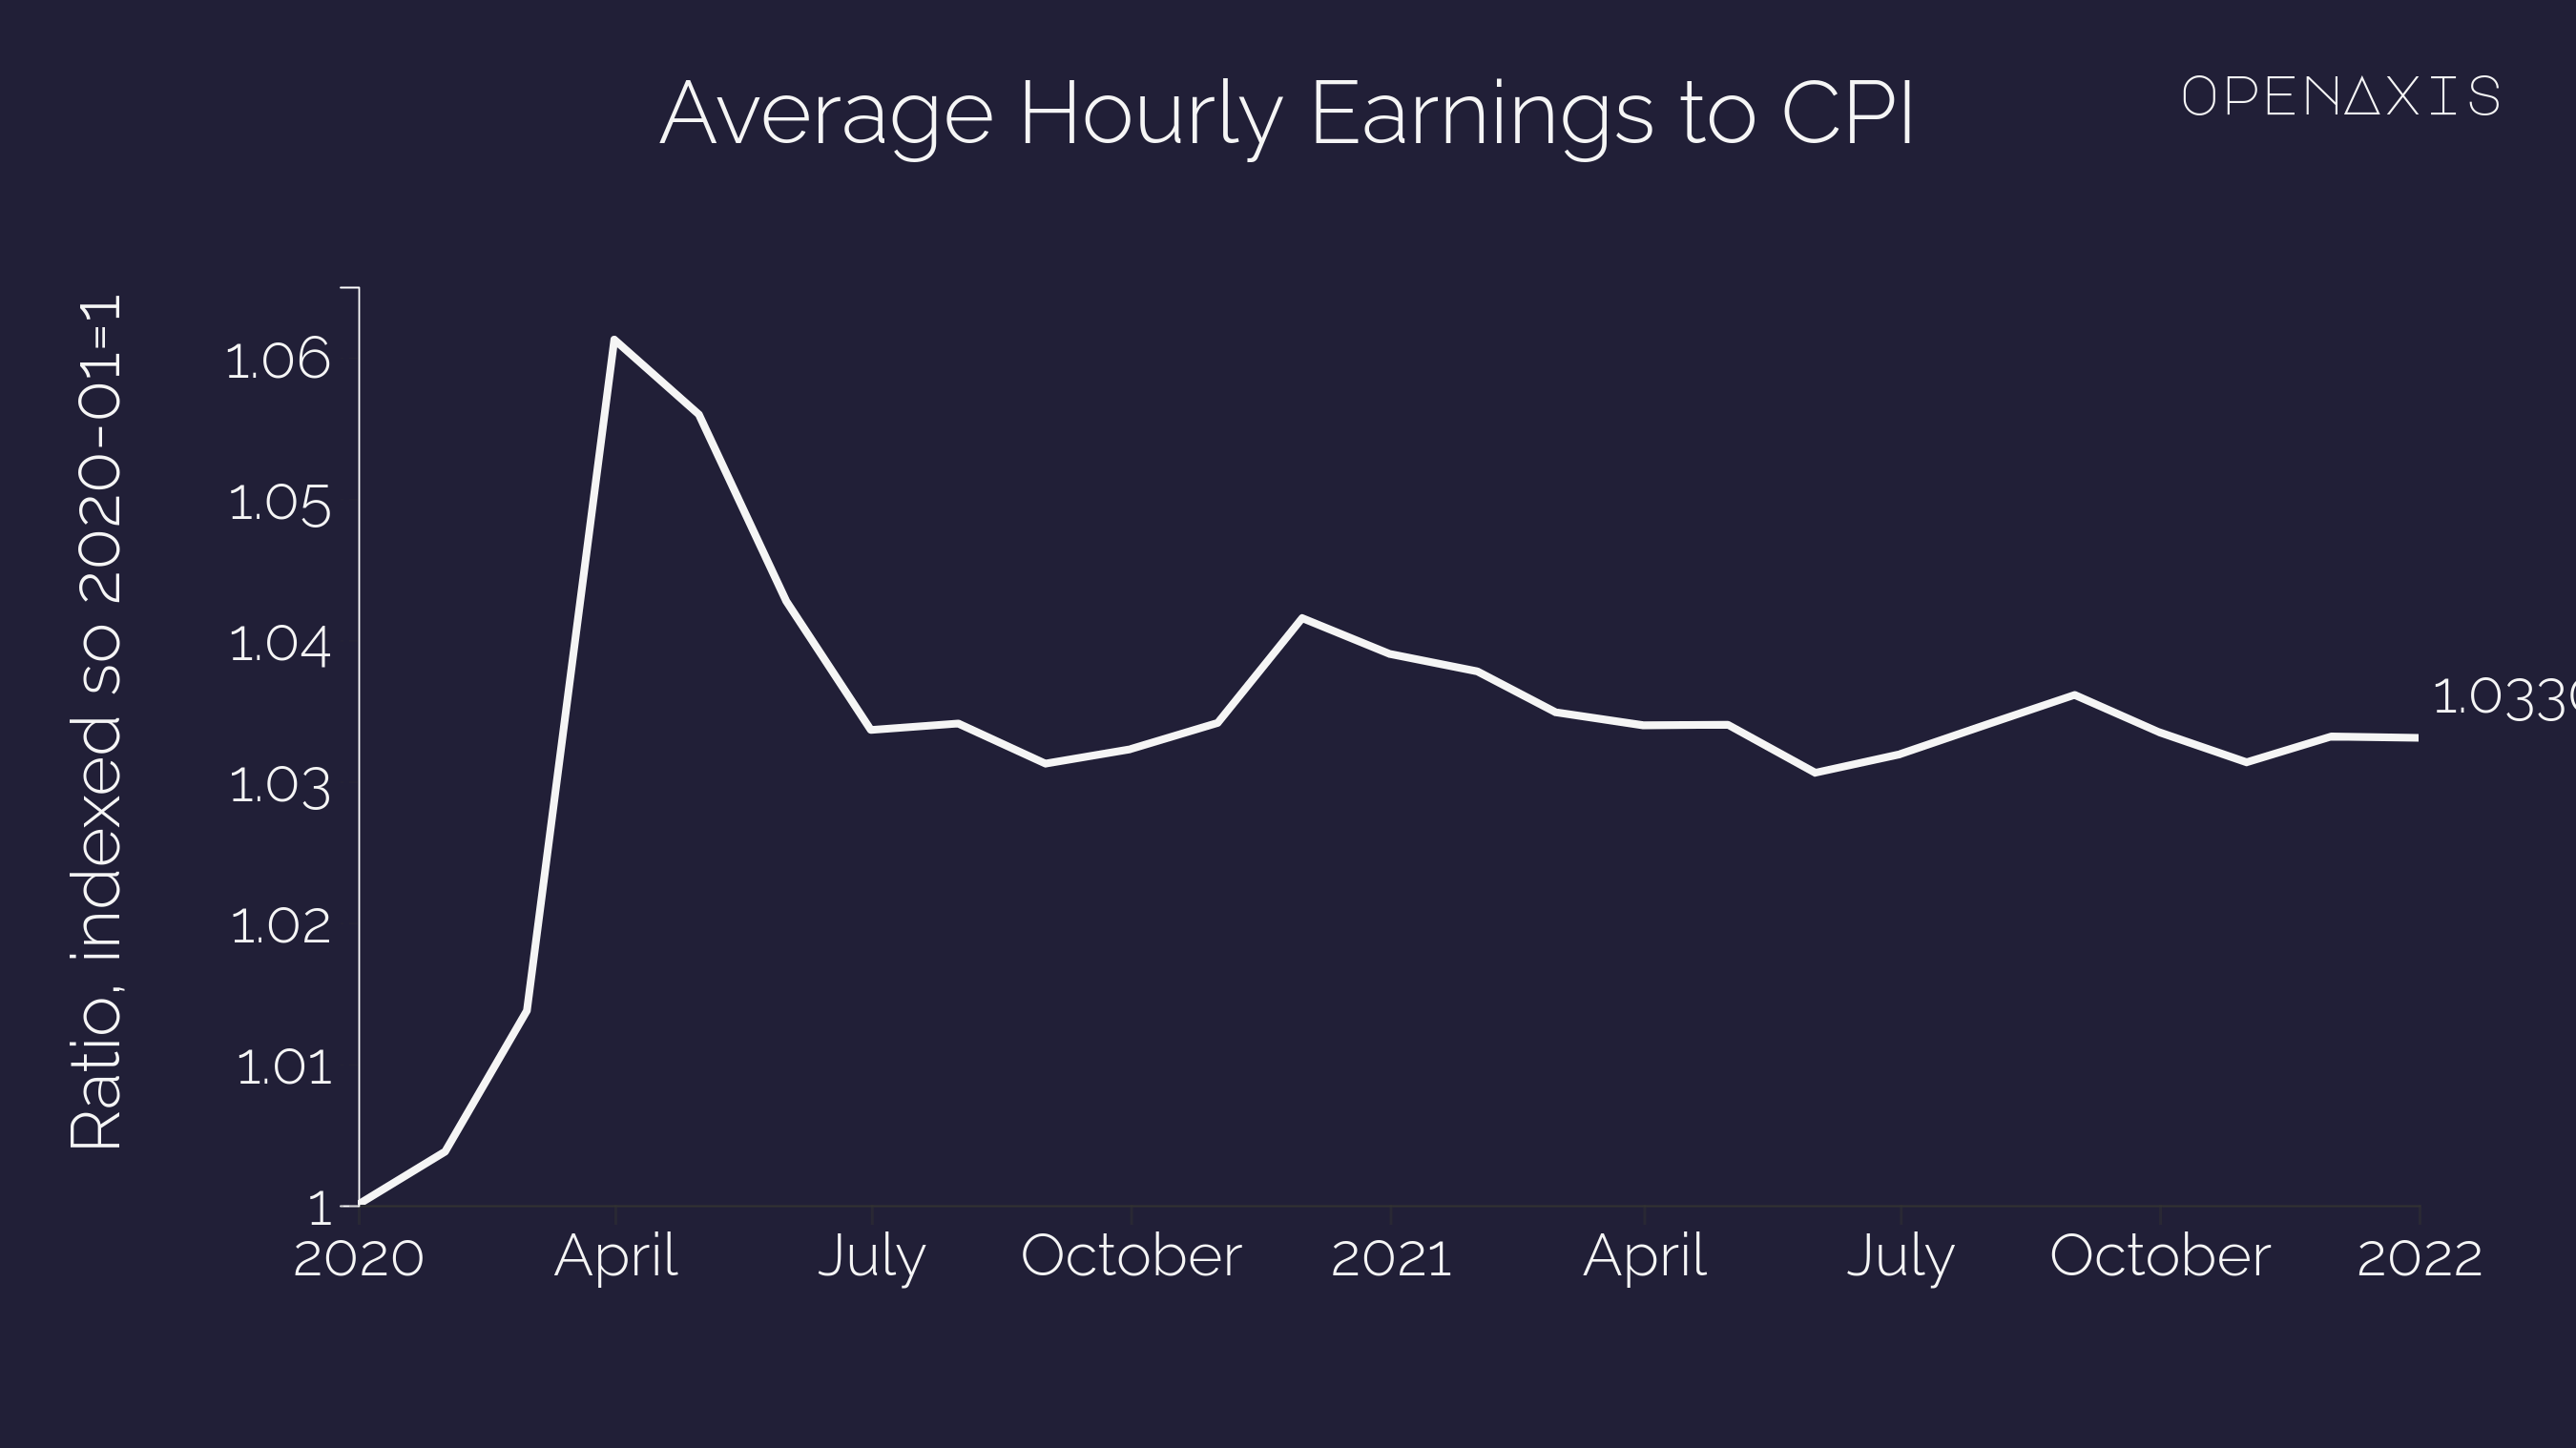 <p>Despite the highest inflation in 40-years, real wages are higher than pre-pandemic.</p><p>Real wages, as calculated by the ratio of Avg. Hrly Earnings to CPI is actually up 3% since Jan 2020!</p><p>Average Hourly Earnings are of Production and Nonsupervisory Employees, Total Private, which Paul Krugman used in his Jan 25th op-ed discussing the inflation narrative. </p><p><br /></p><p>﻿<a href="/search?q=%23economy" target="_self">#economy</a>﻿ ﻿<a href="/search?q=%23inflation" target="_self">#inflation</a>﻿ ﻿<a href="/search?q=%23wages" target="_self">#wages</a>﻿ </p>